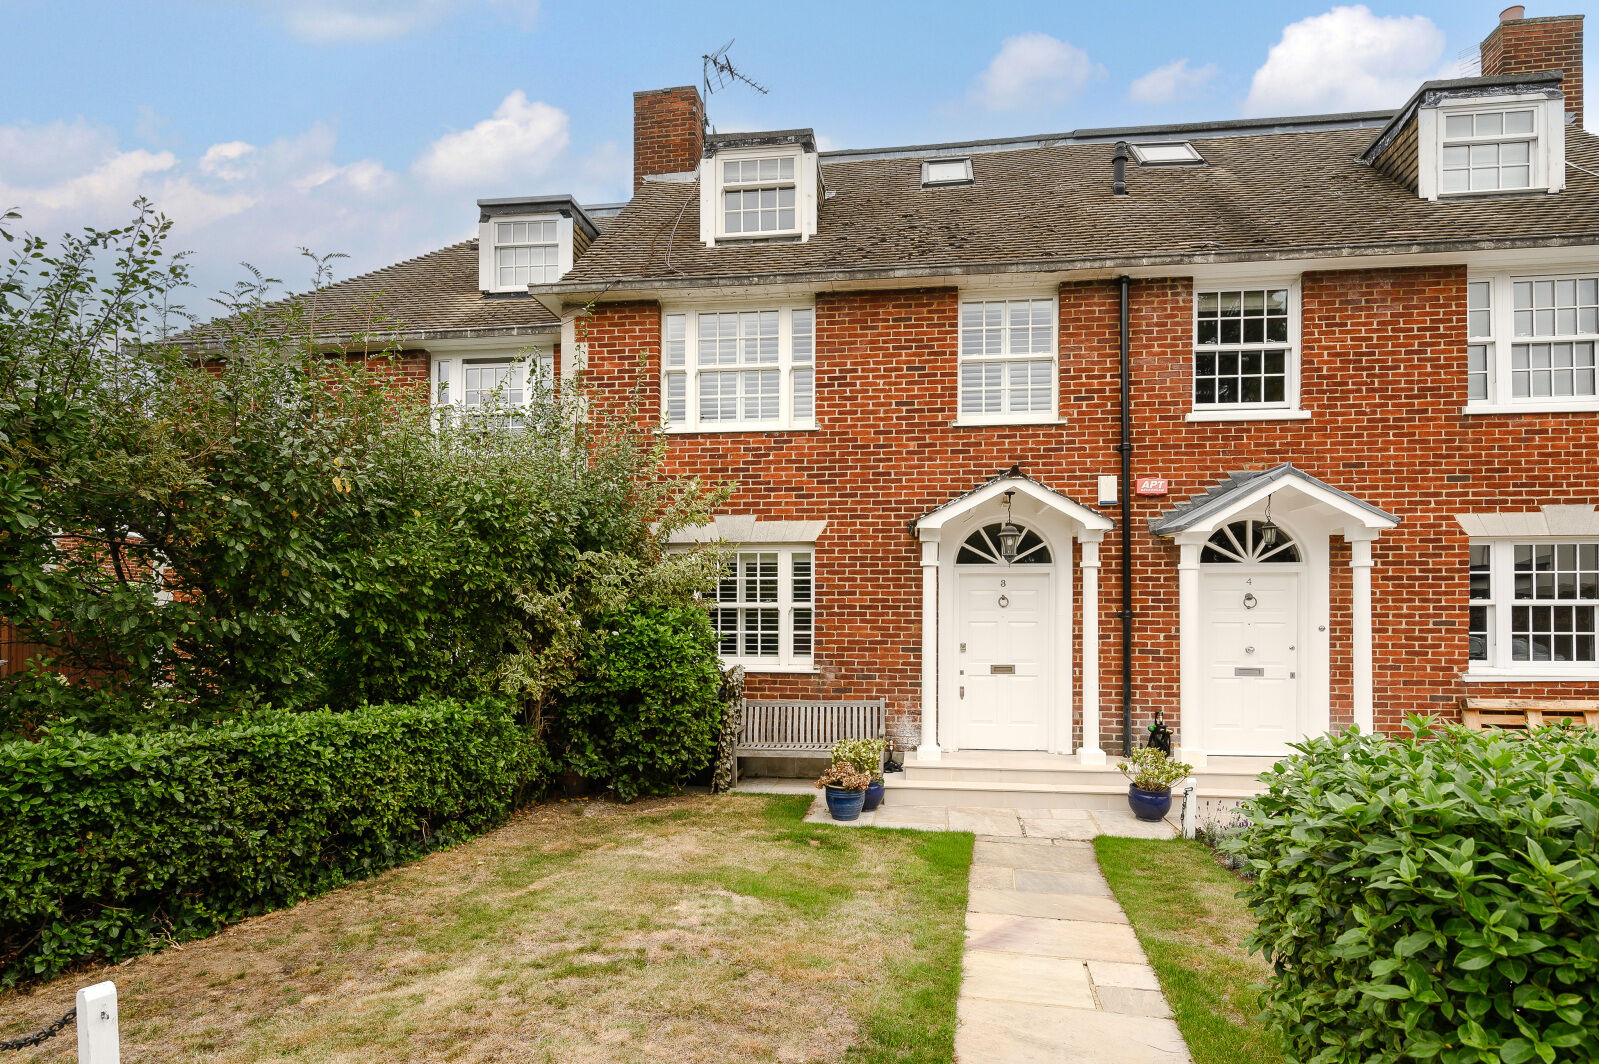 4 bedroom mid terraced house for sale Old House Close, Wimbledon, SW19, main image